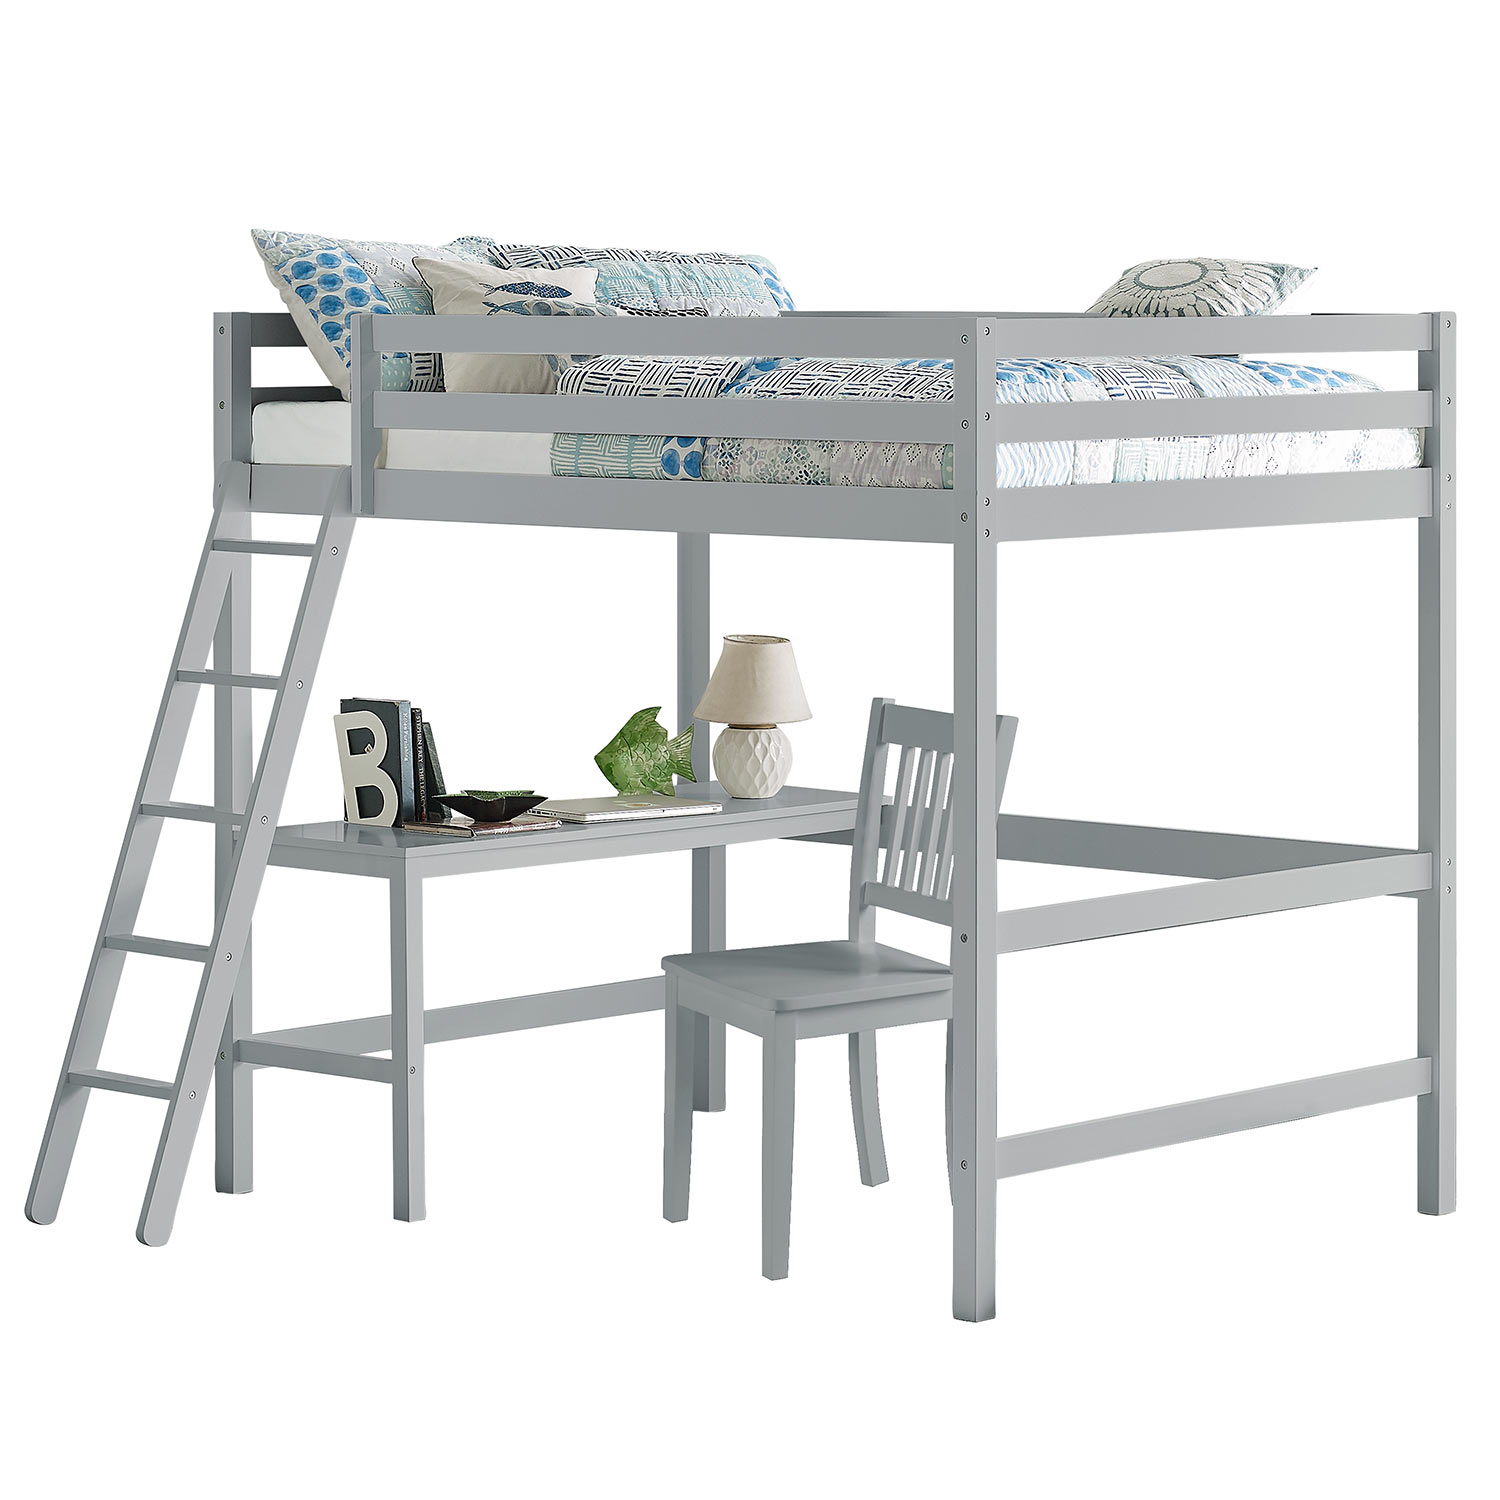 Hillsdale Caspian Full Loft Bed with Chair - Gray